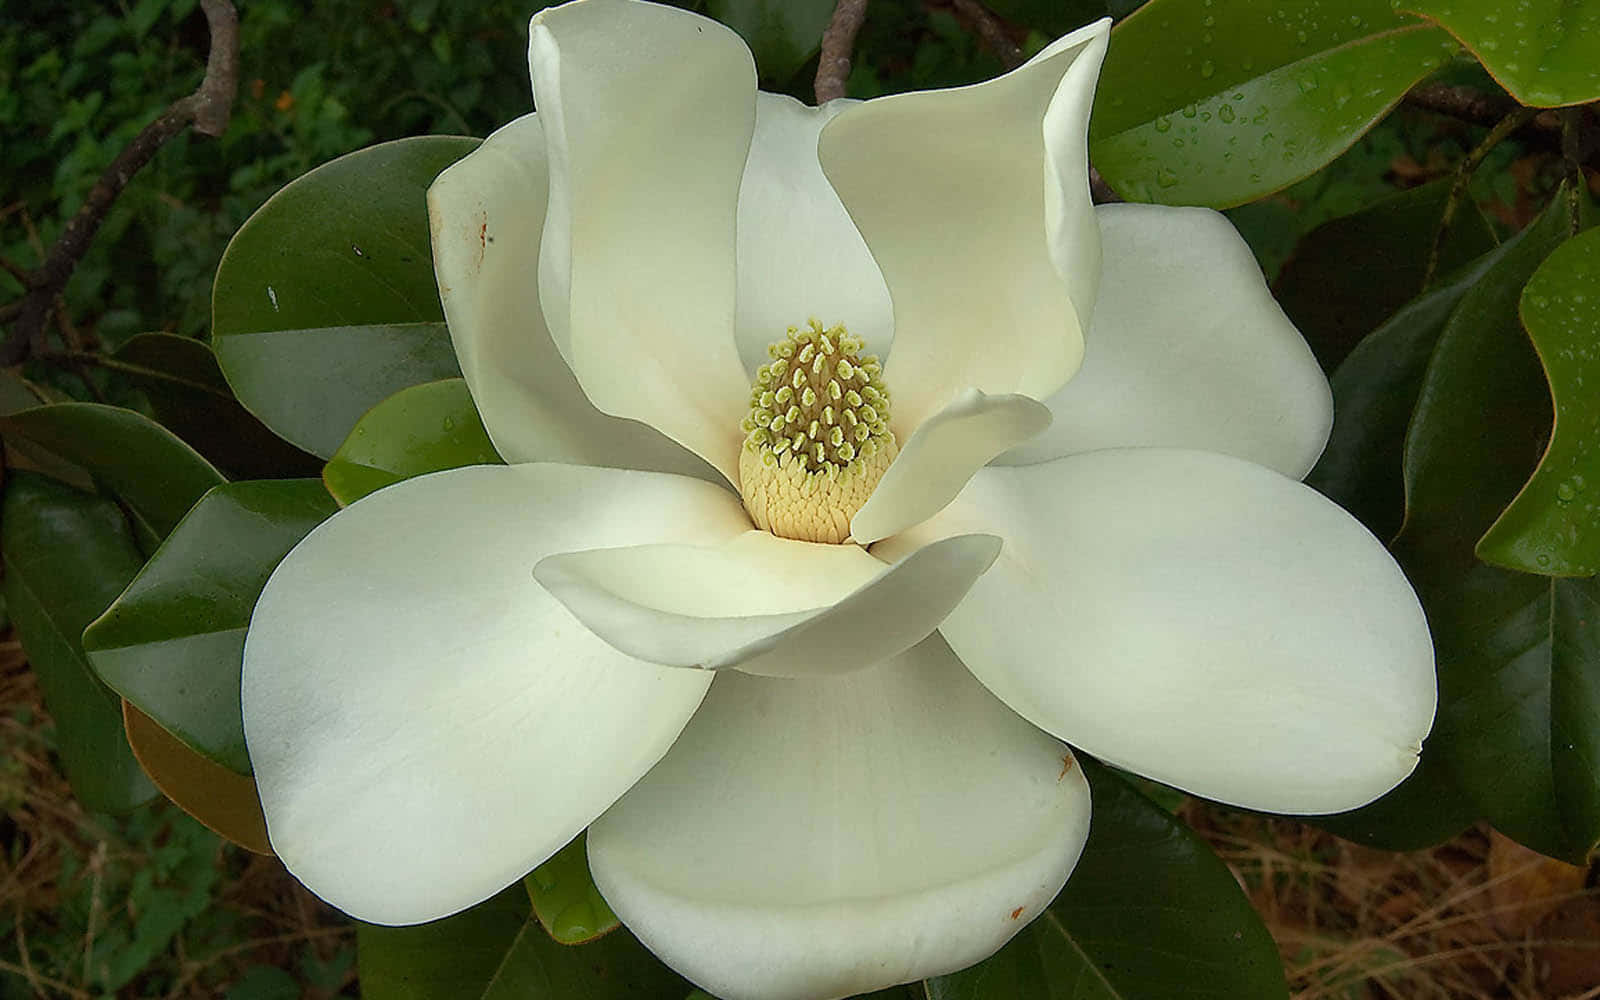 A blossom of magnolias in all their beauty